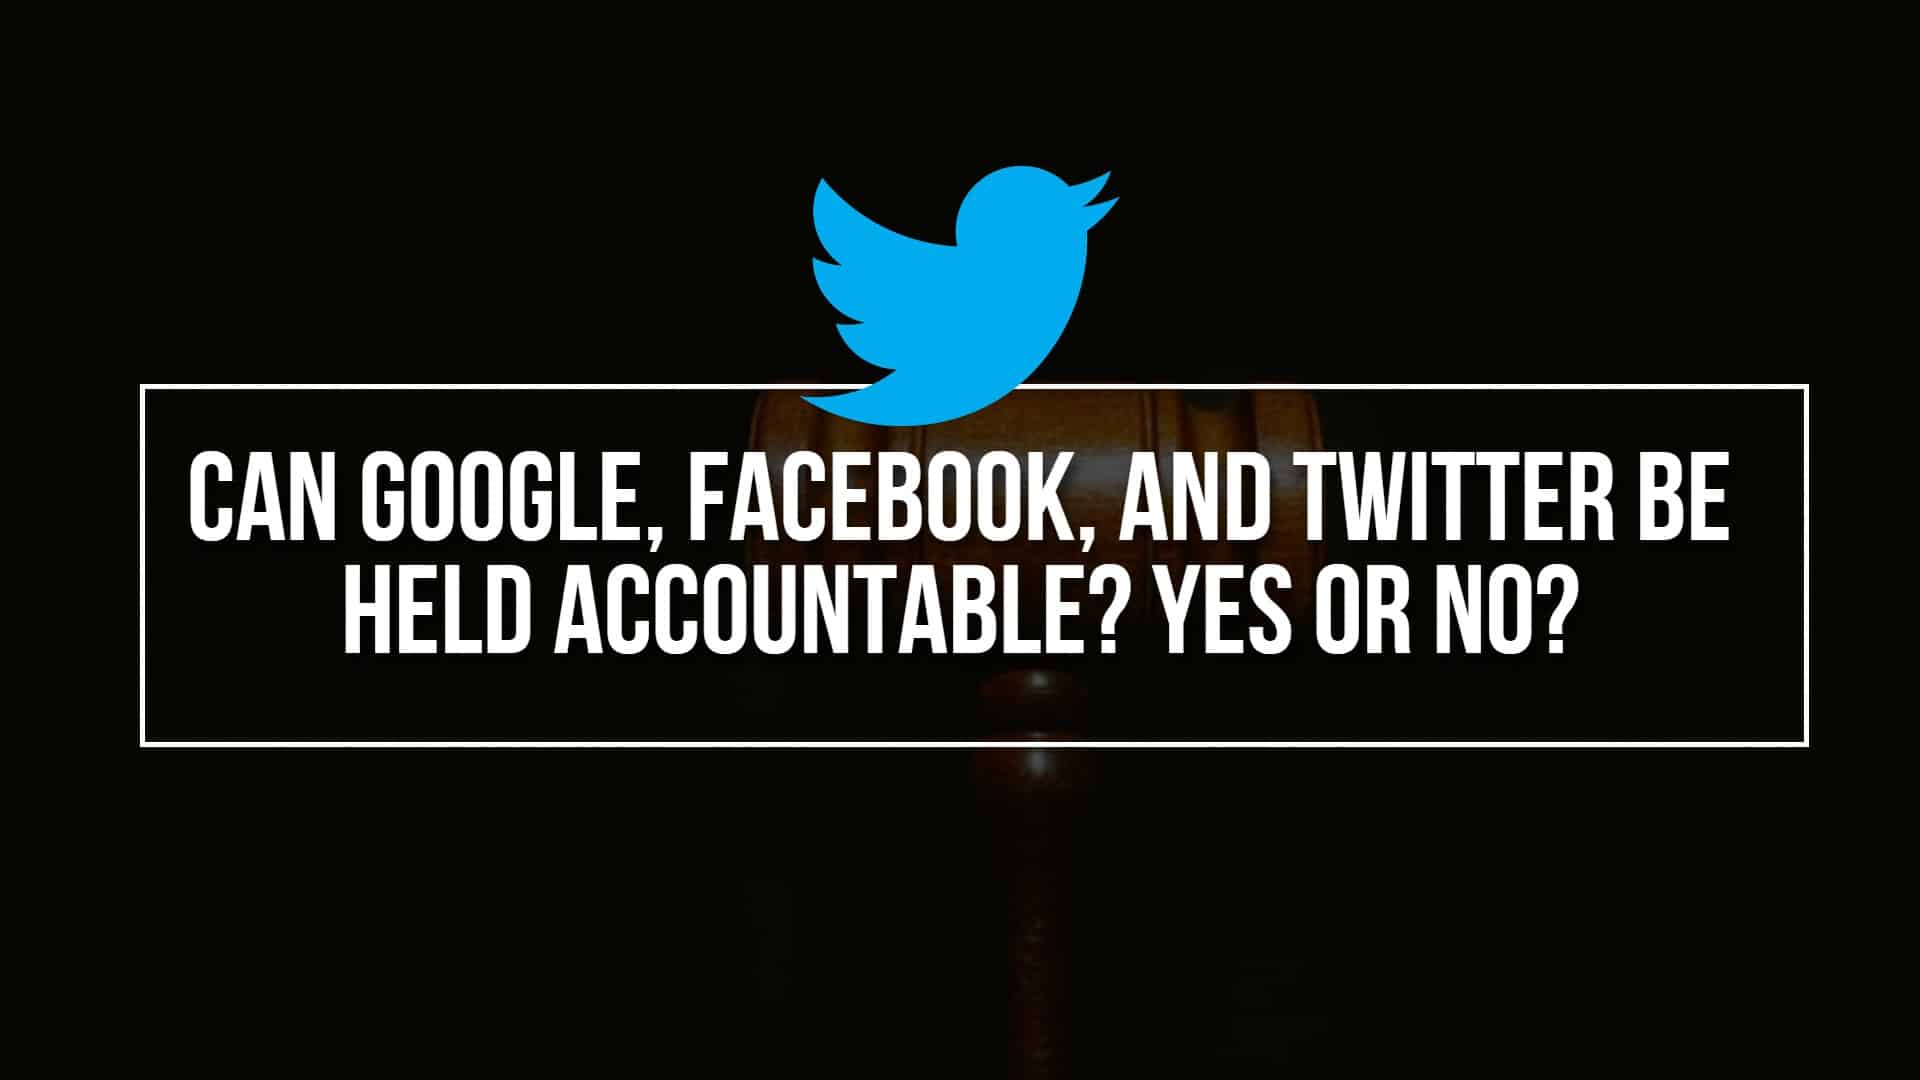 Can Google, Facebook, and Twitter Be Held Accountable? Yes or No?